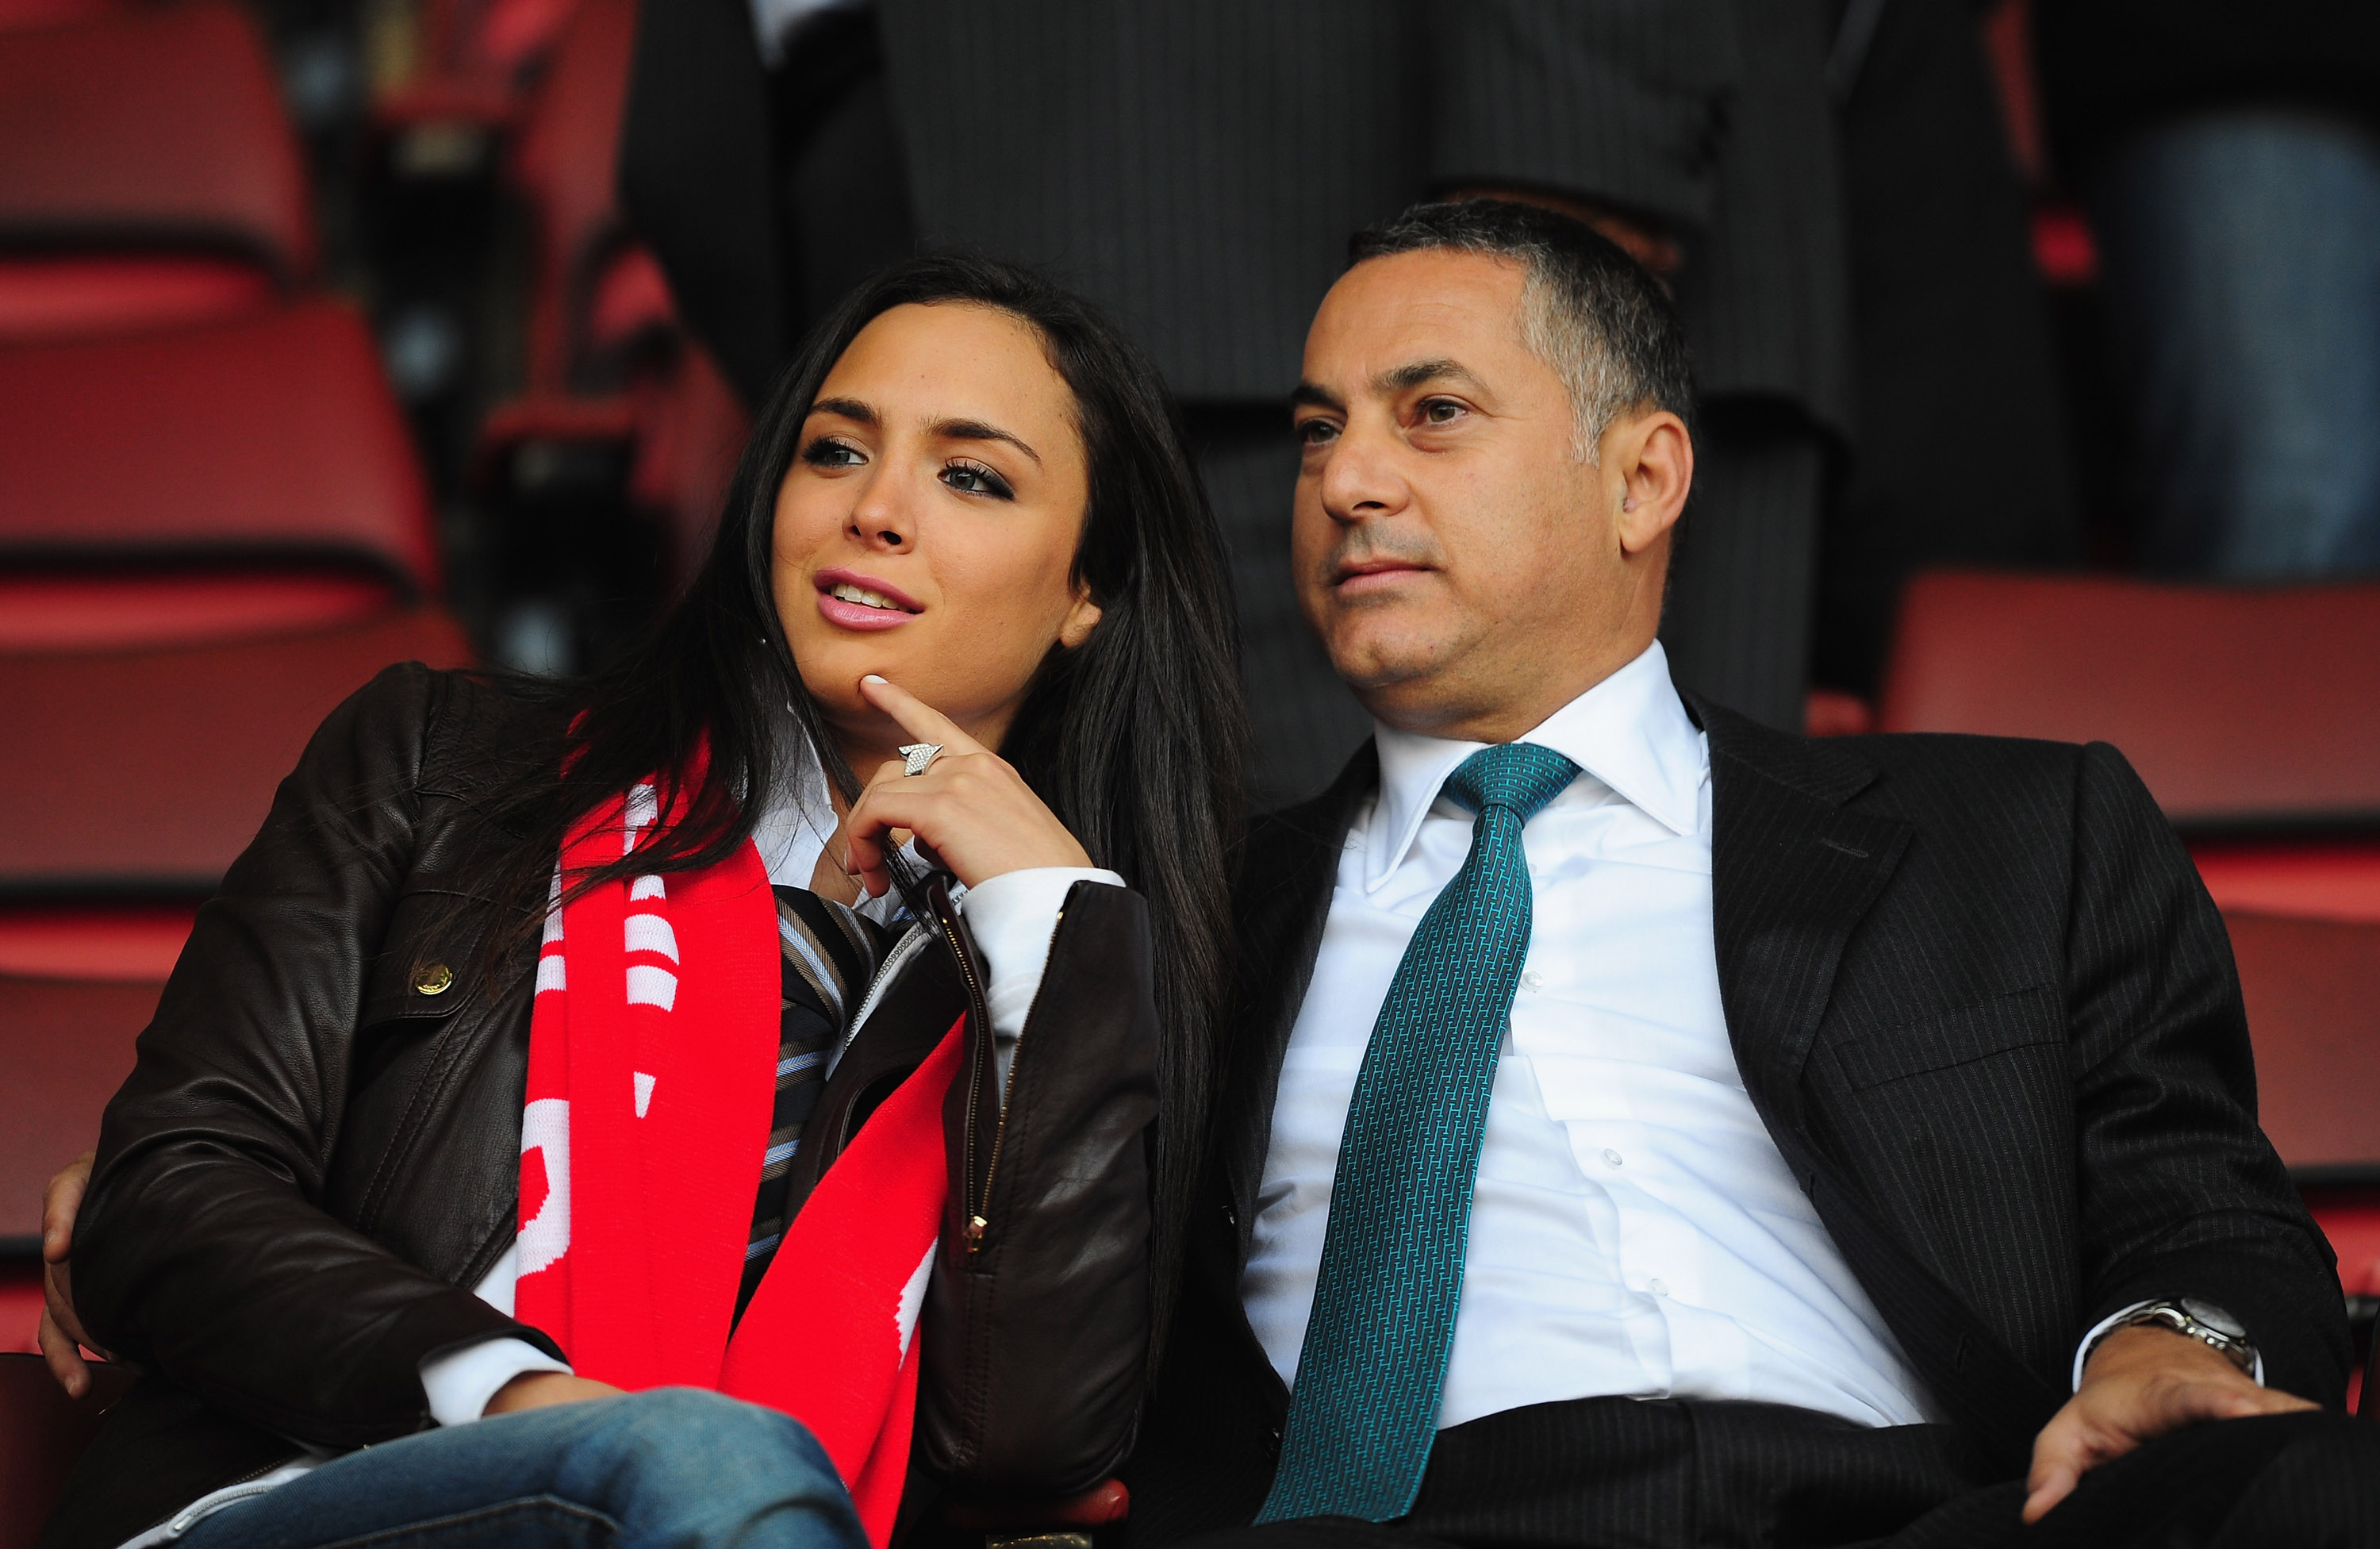 Liverpool’s next potential owner has assets almost on par with Man City’s Sheikh Mansour